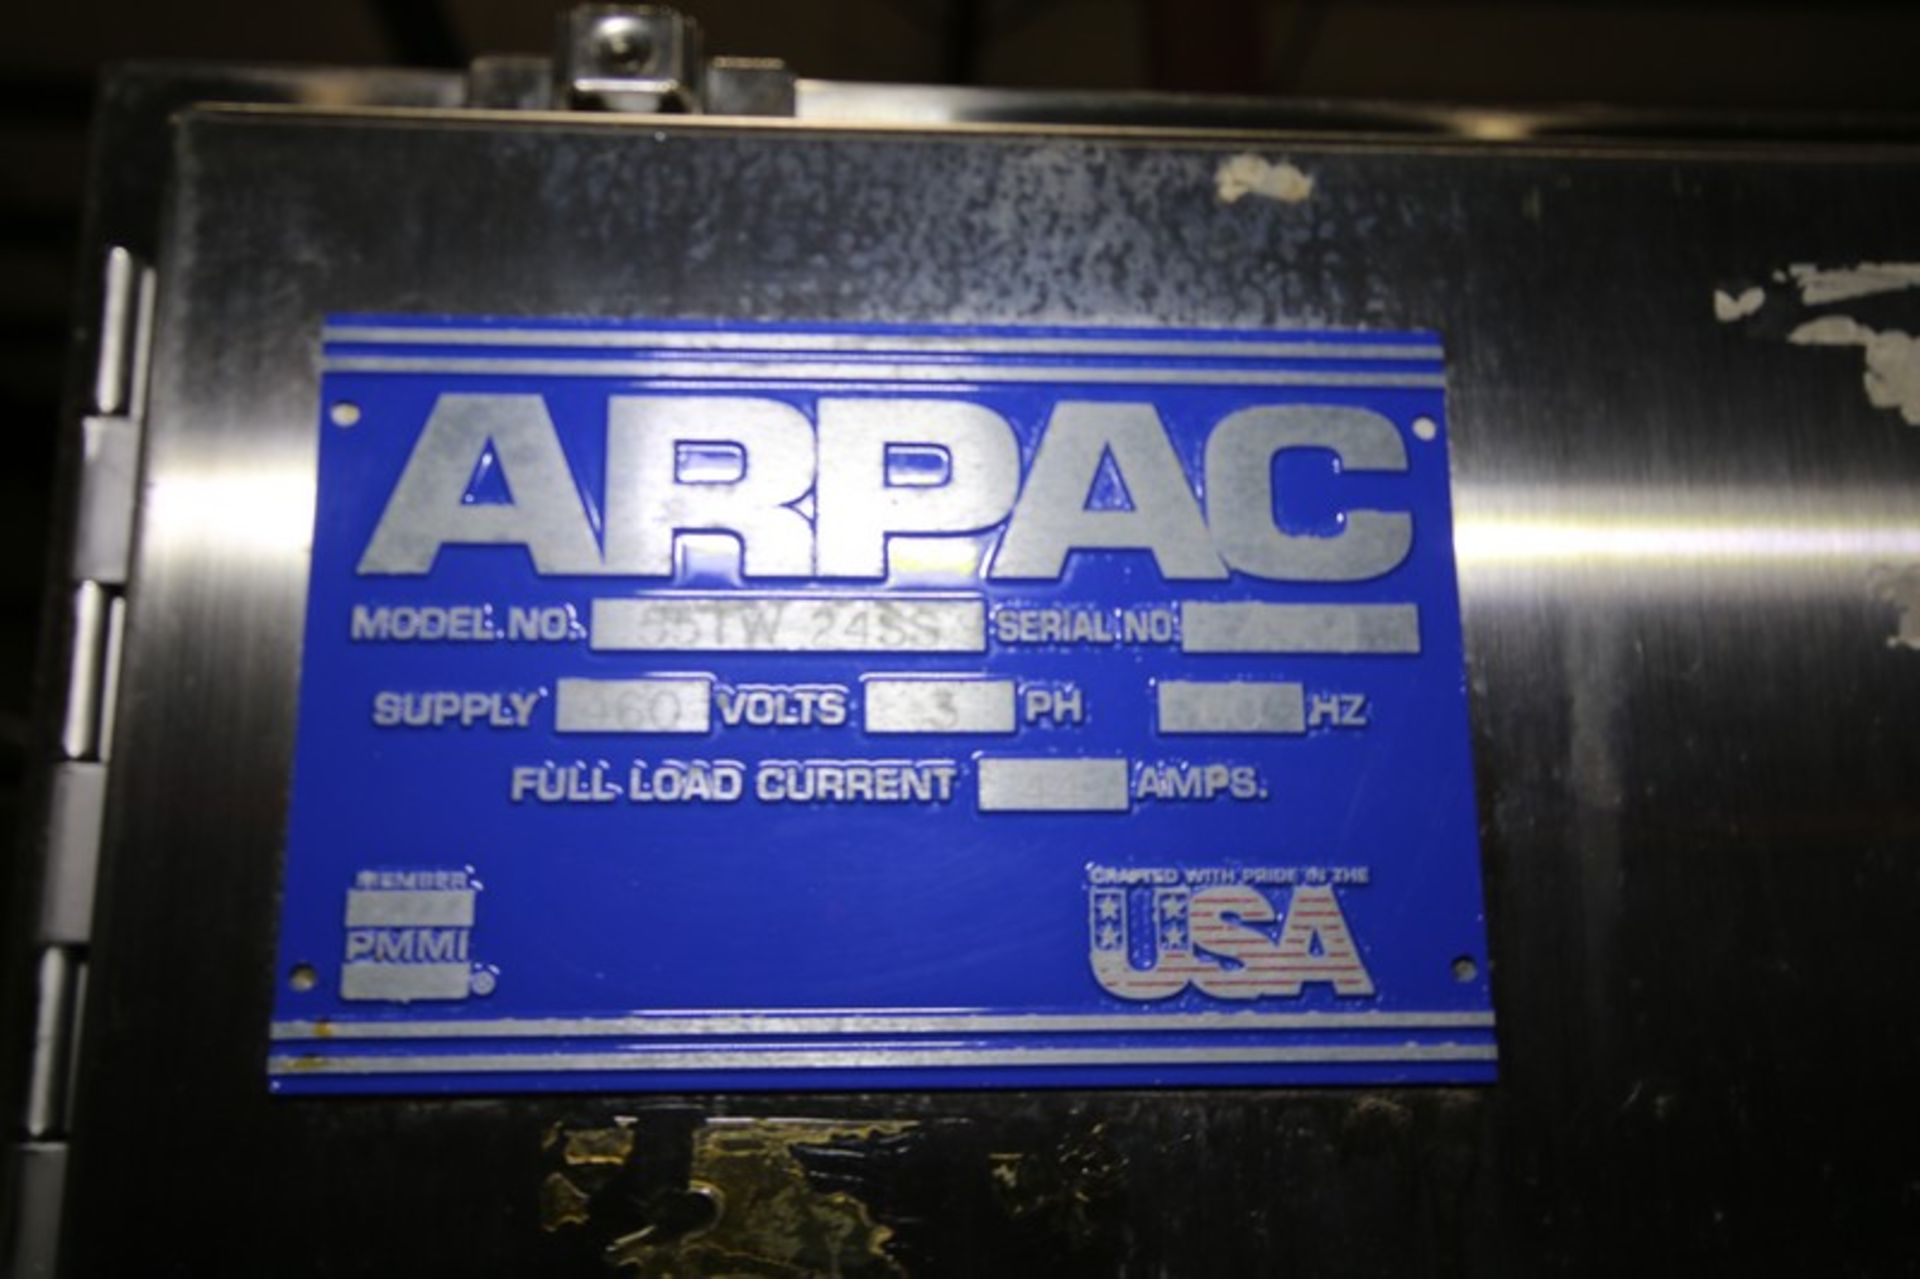 Arpac S/S Shrink Wrapper/Bundler, Model 55TW-24SS, SN 4934, with 16" H Product Height, 2" W Belt, - Image 14 of 14